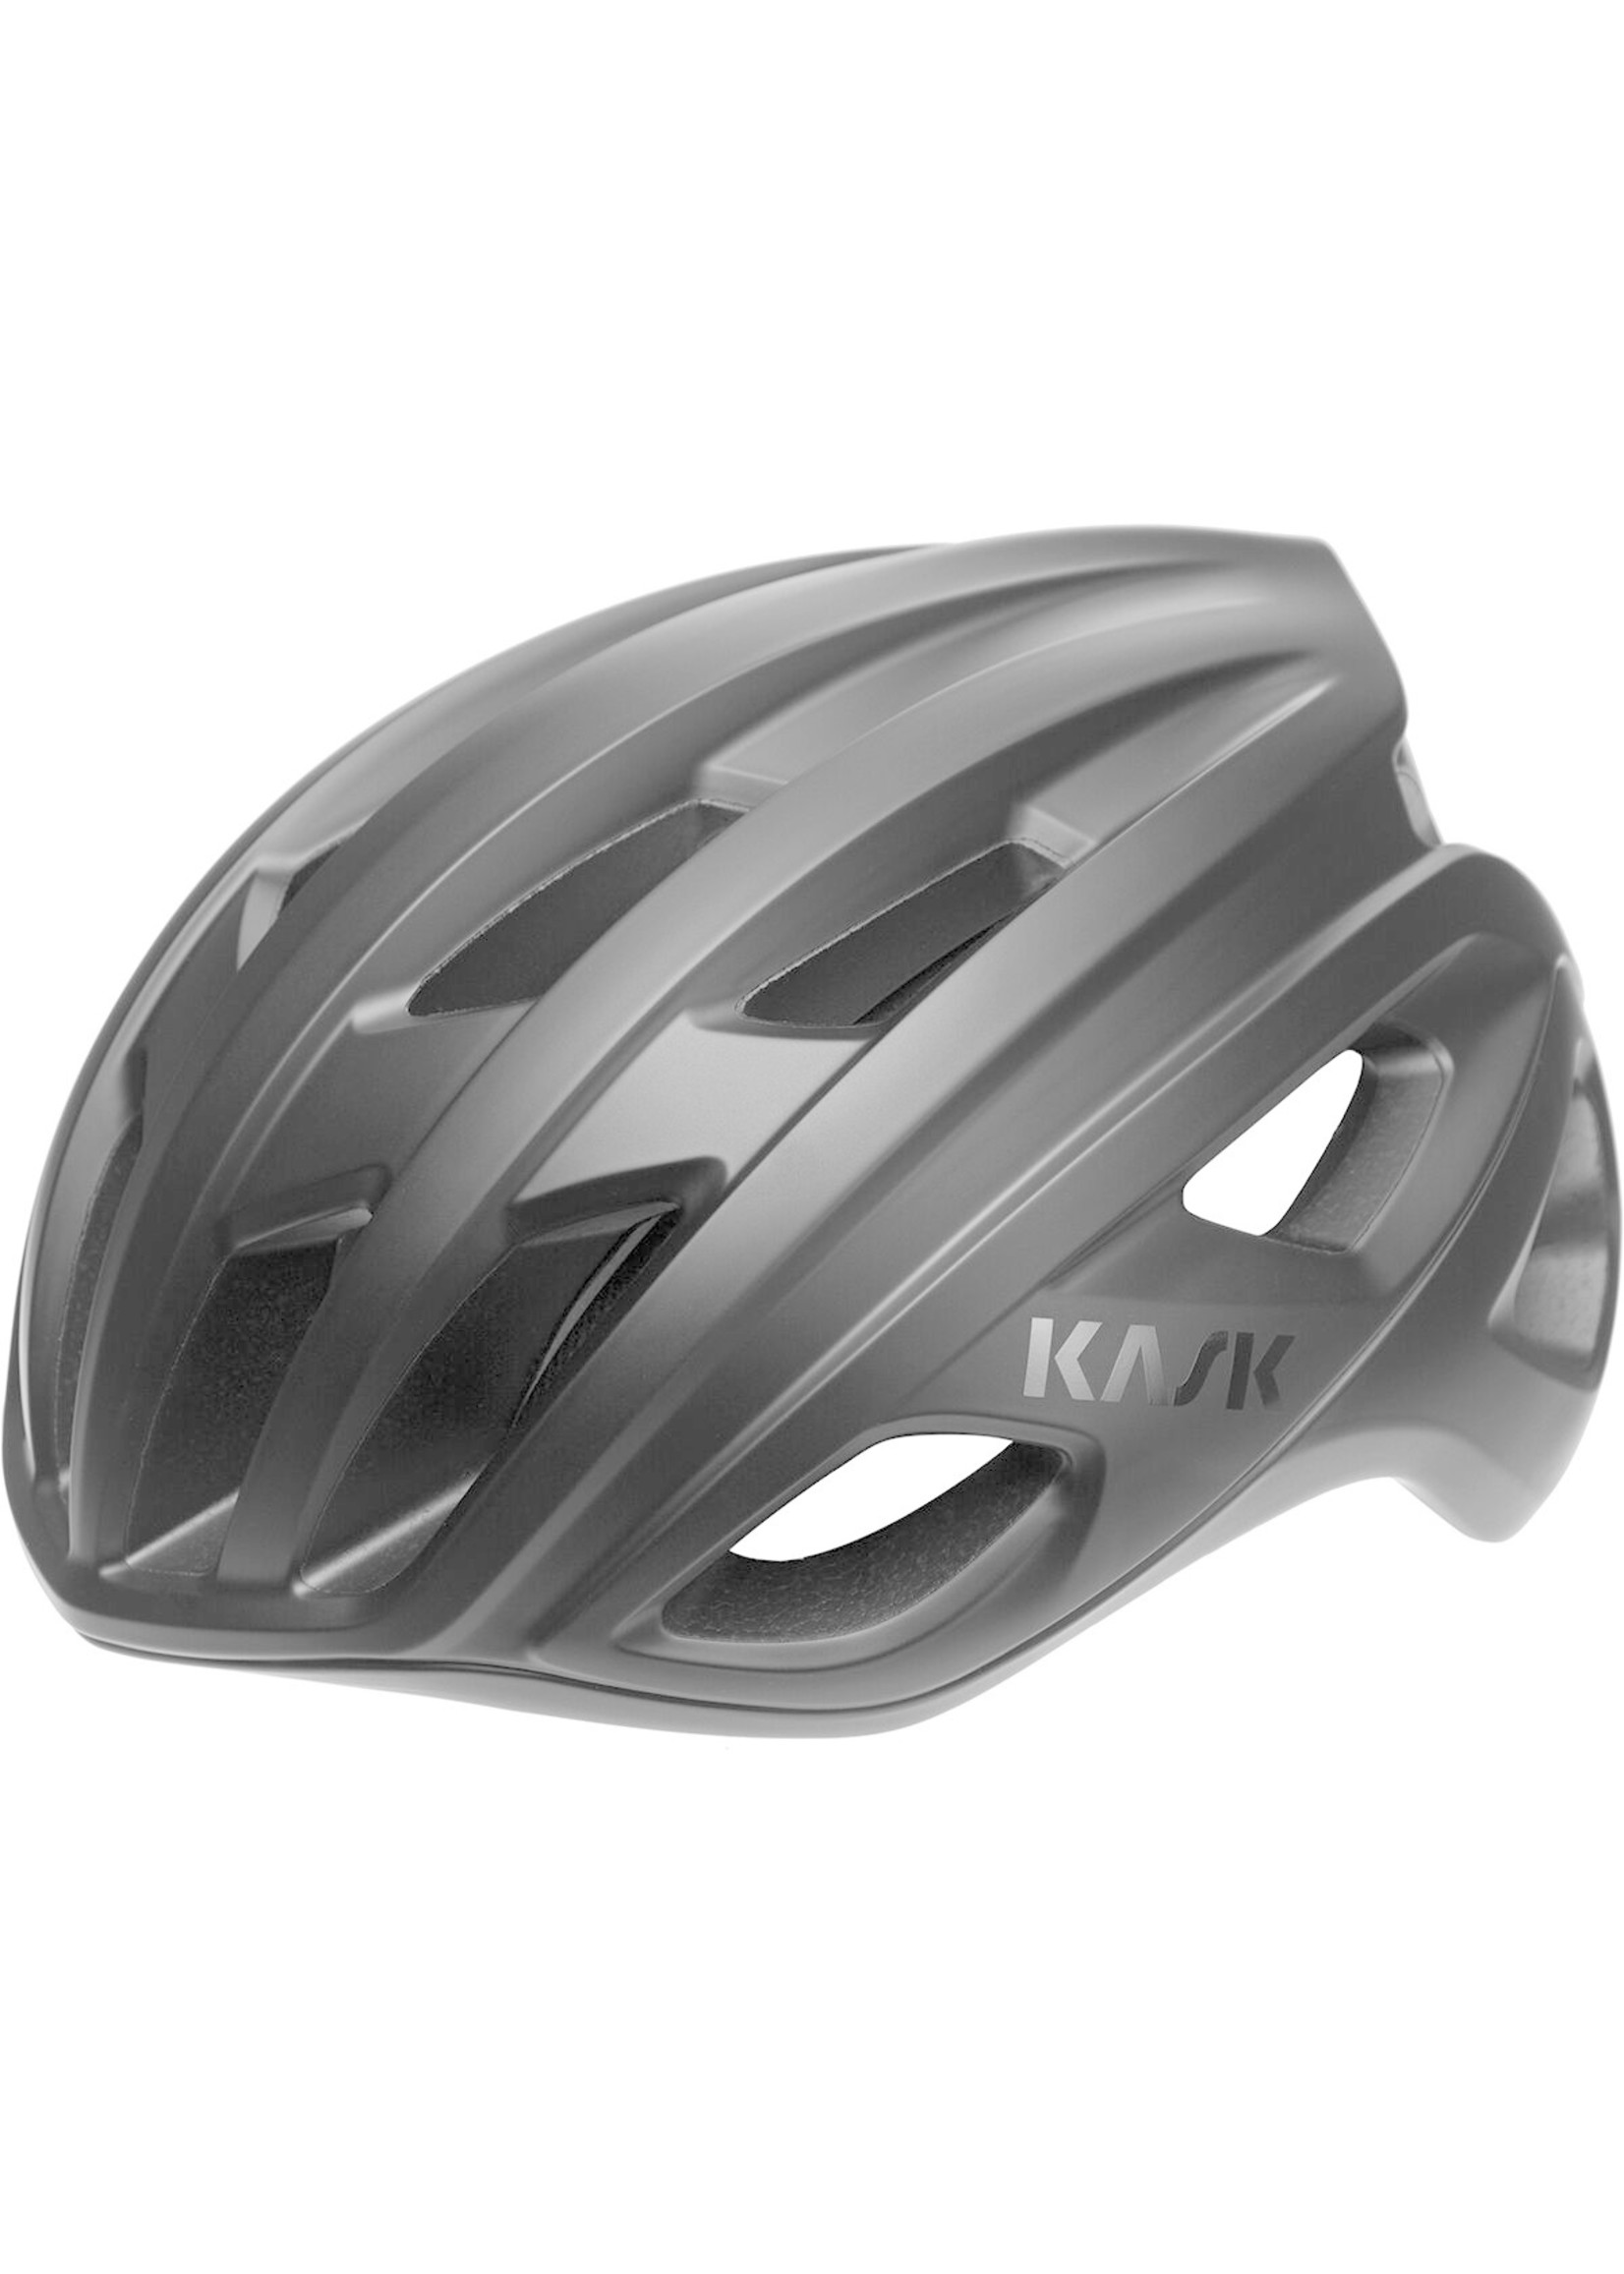 Kask Mojito Cubed -Blk Matte -Lg